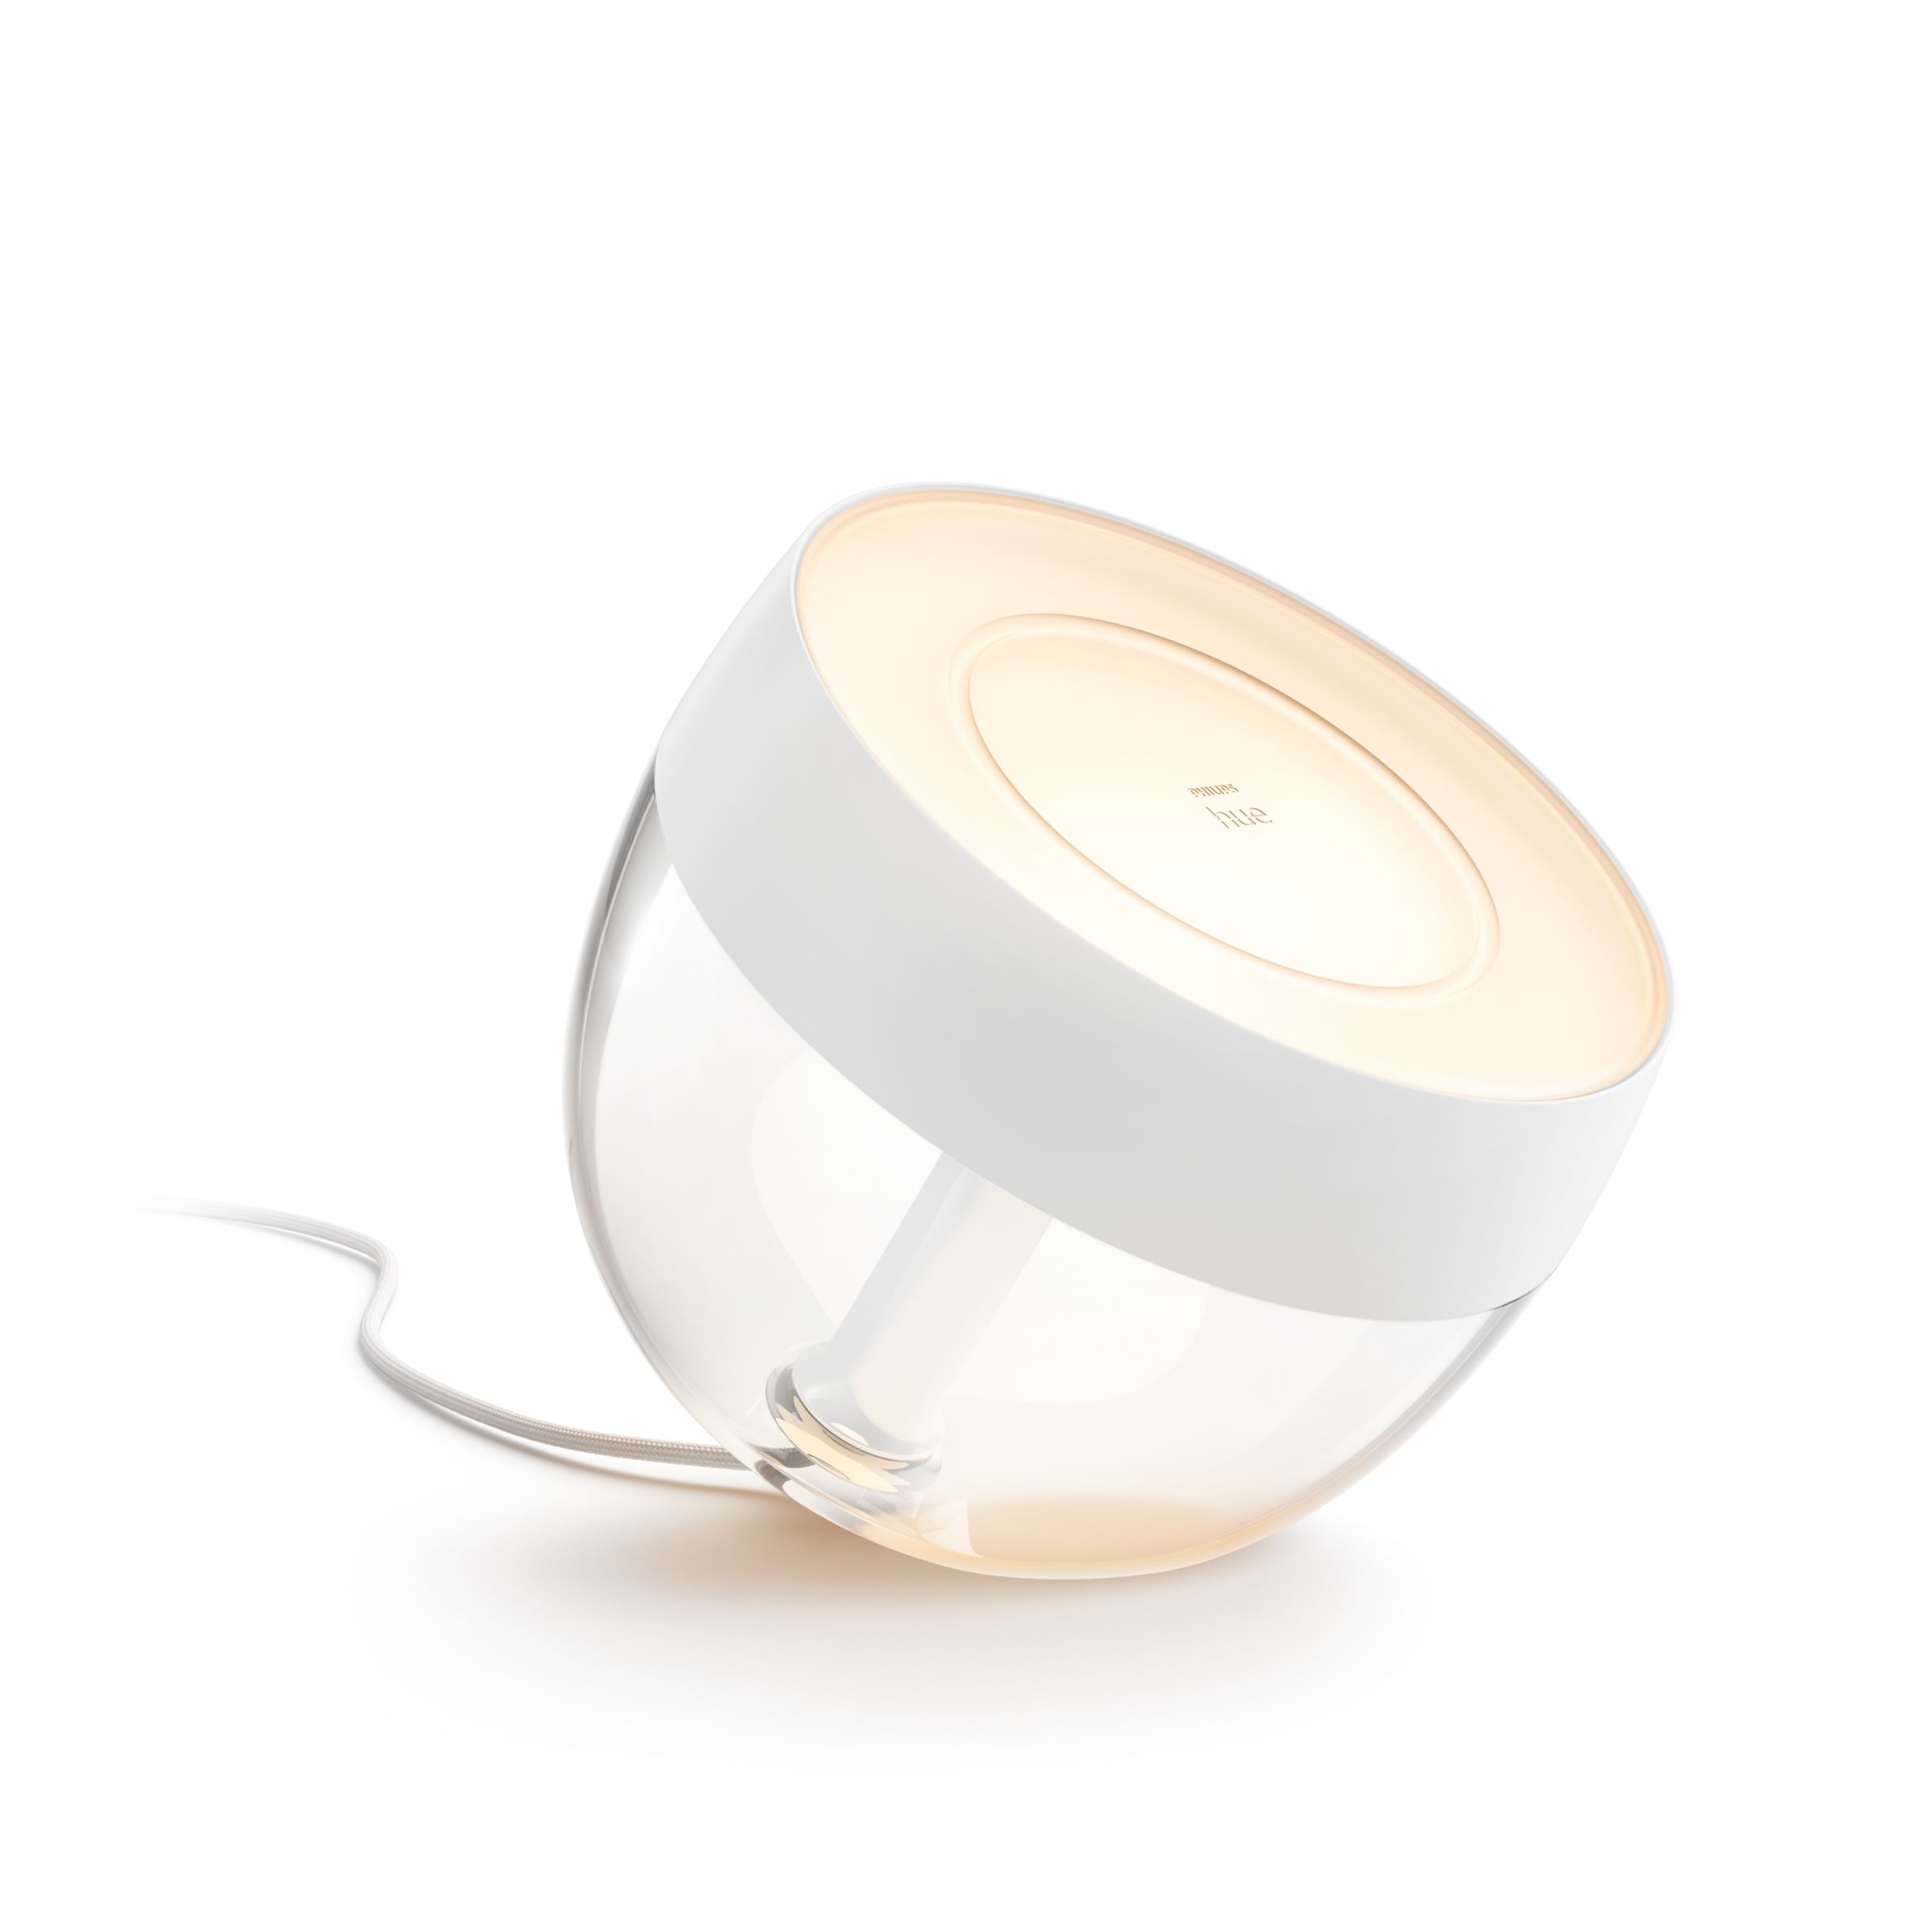 Hue Iris Table Lamp White - White and Colour Ambiance | Philips Hue US